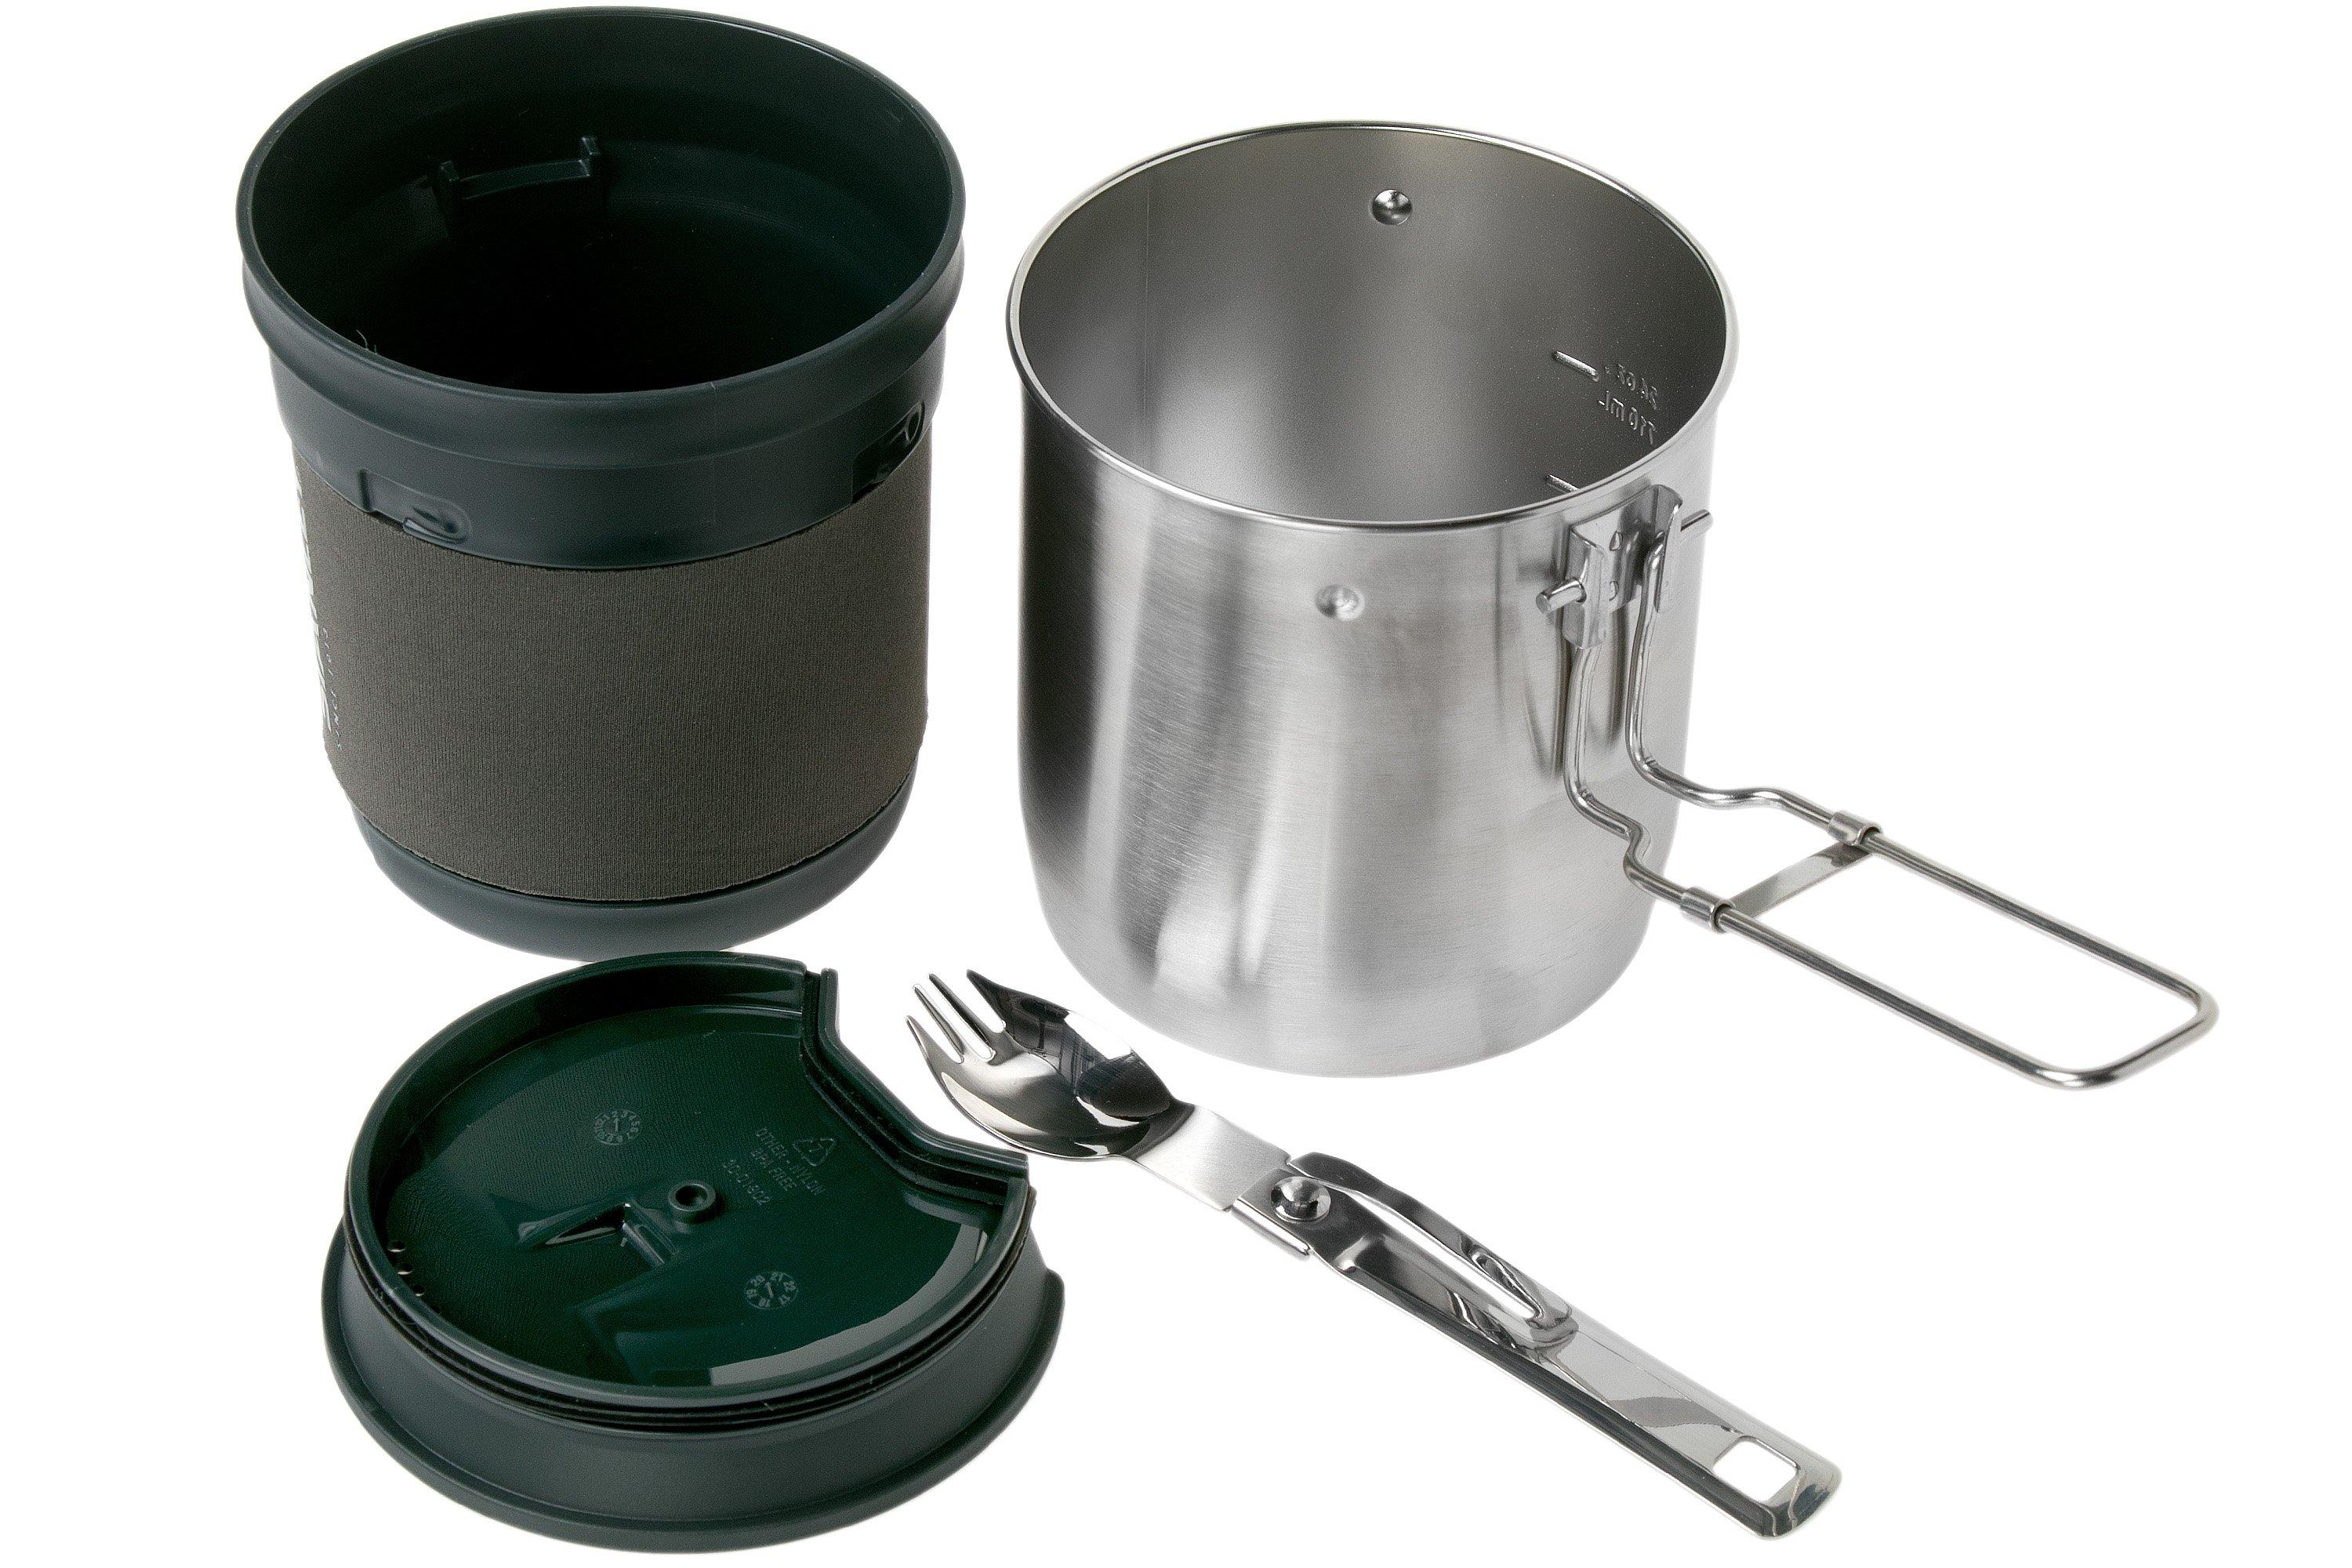 Stanley Compact Cook Set